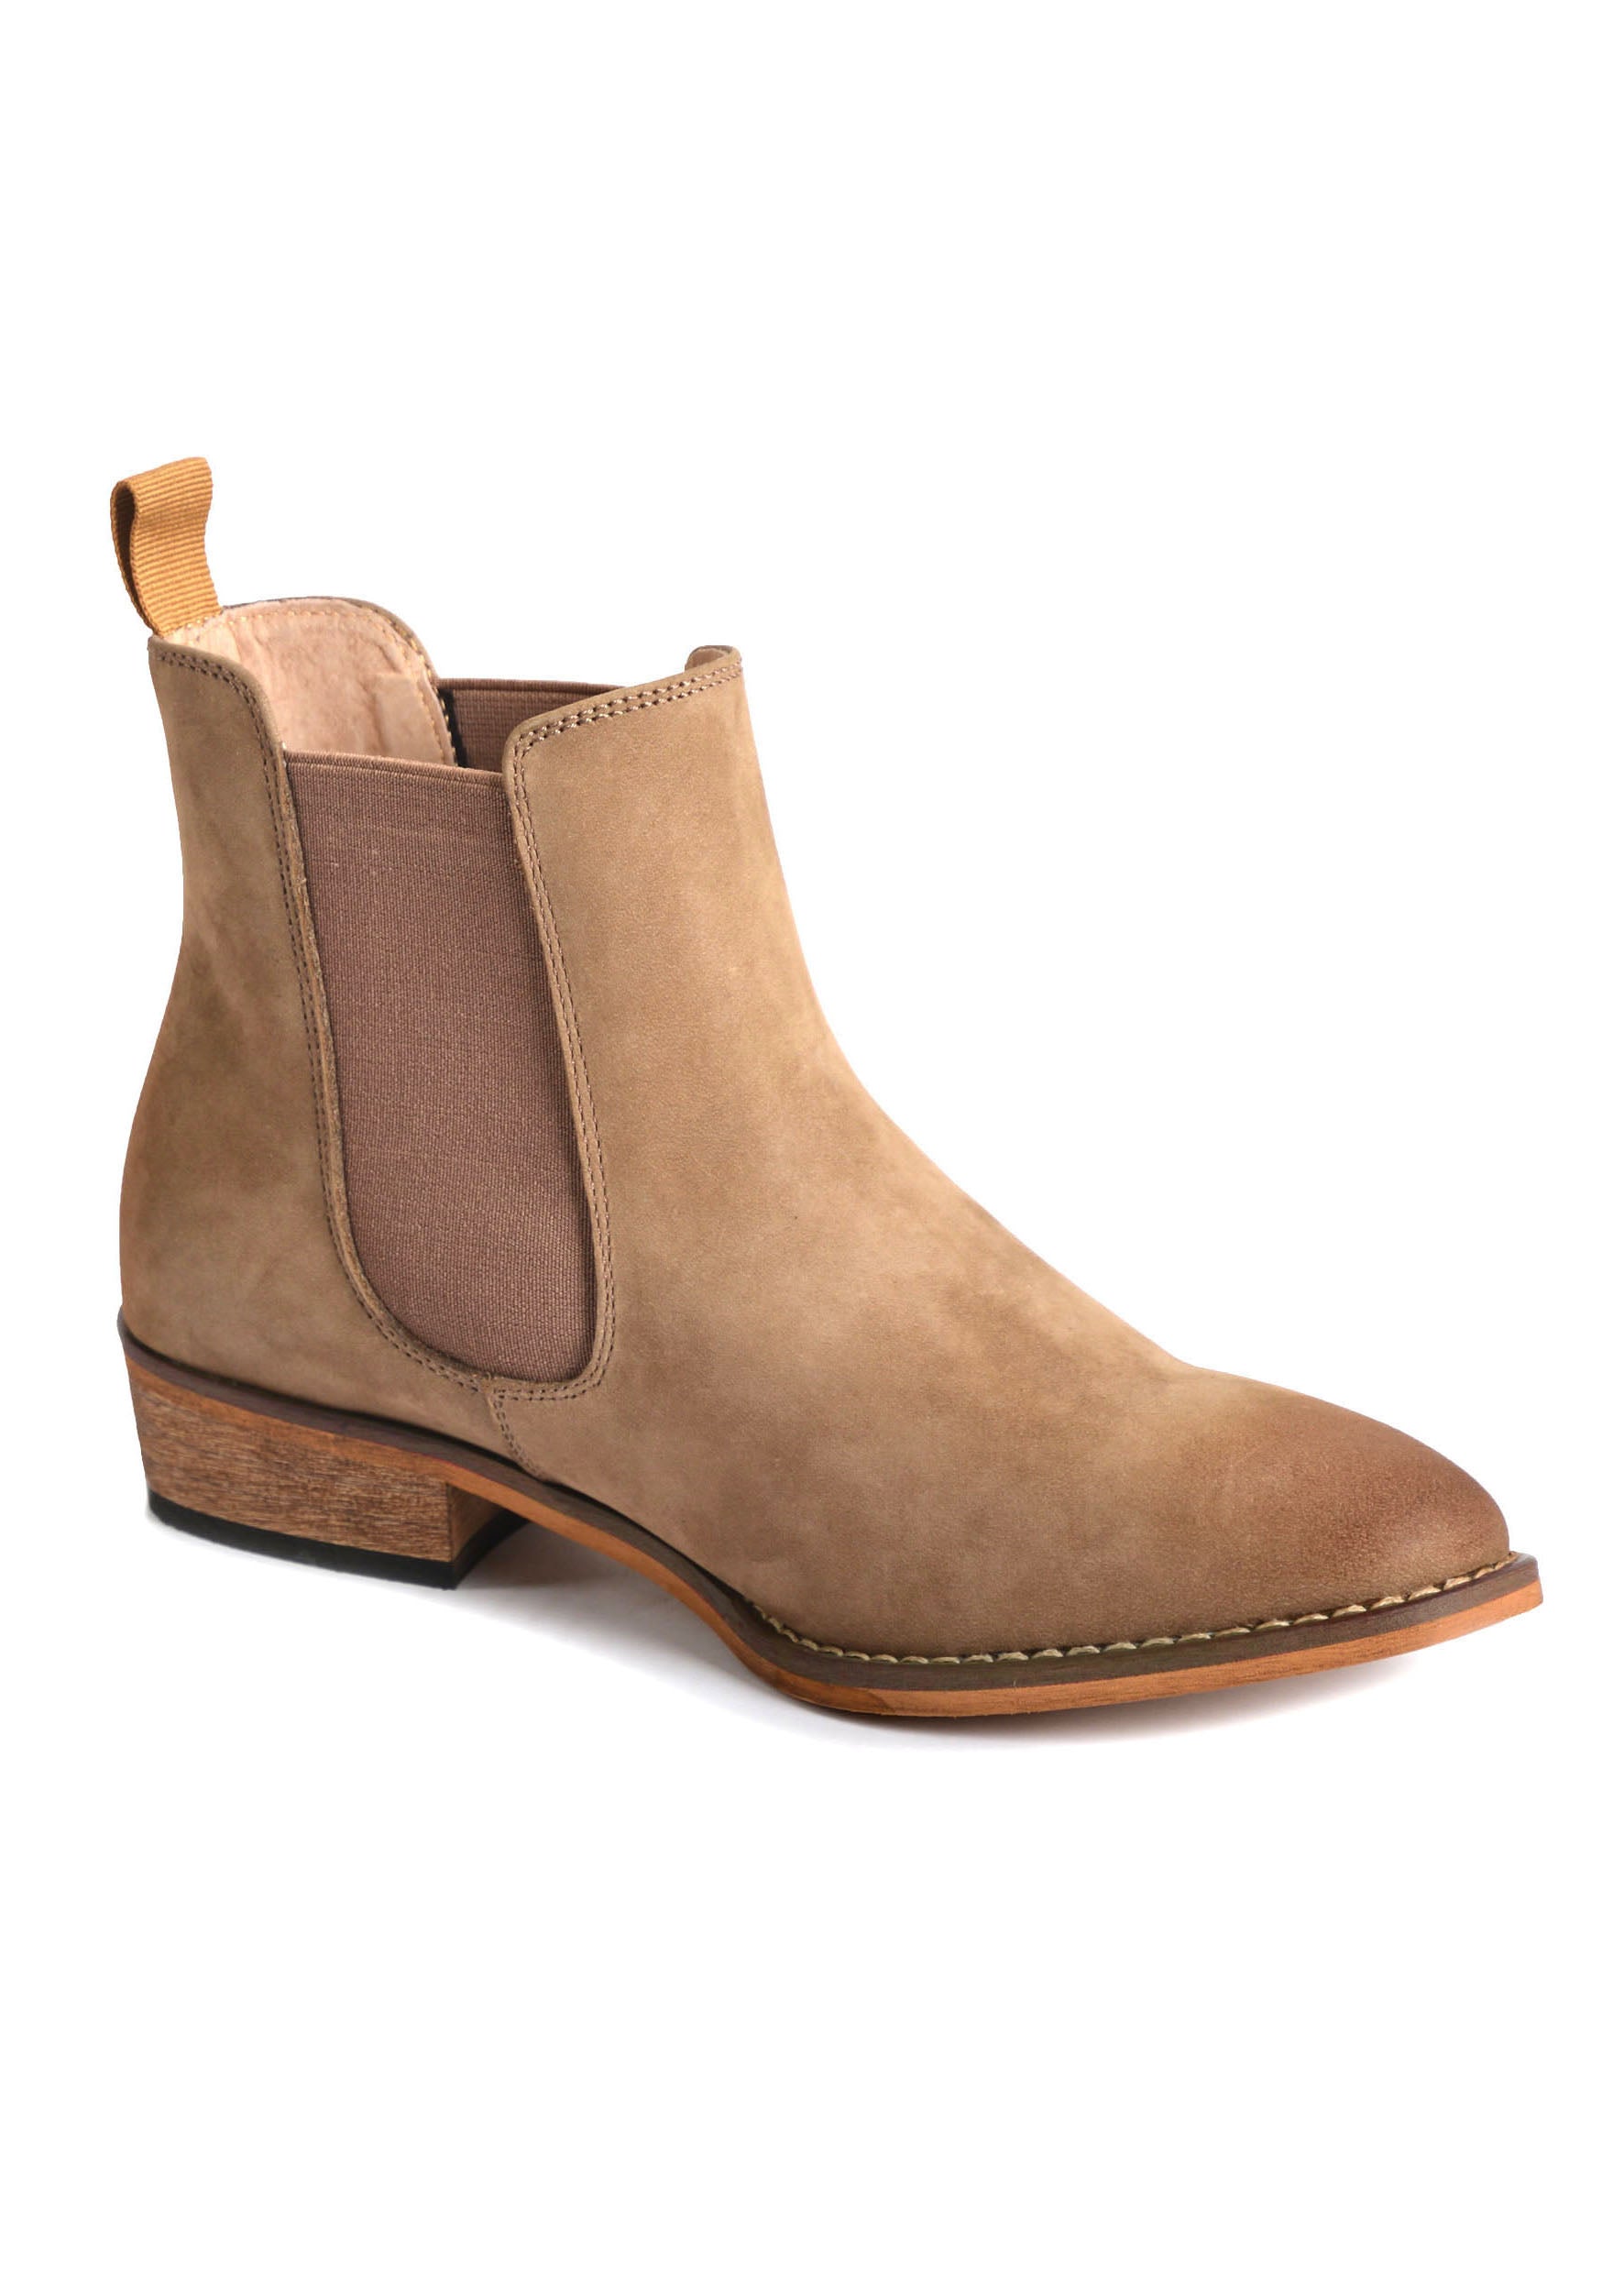 Thomas Cook Chelsea Boot - CLEARANCE